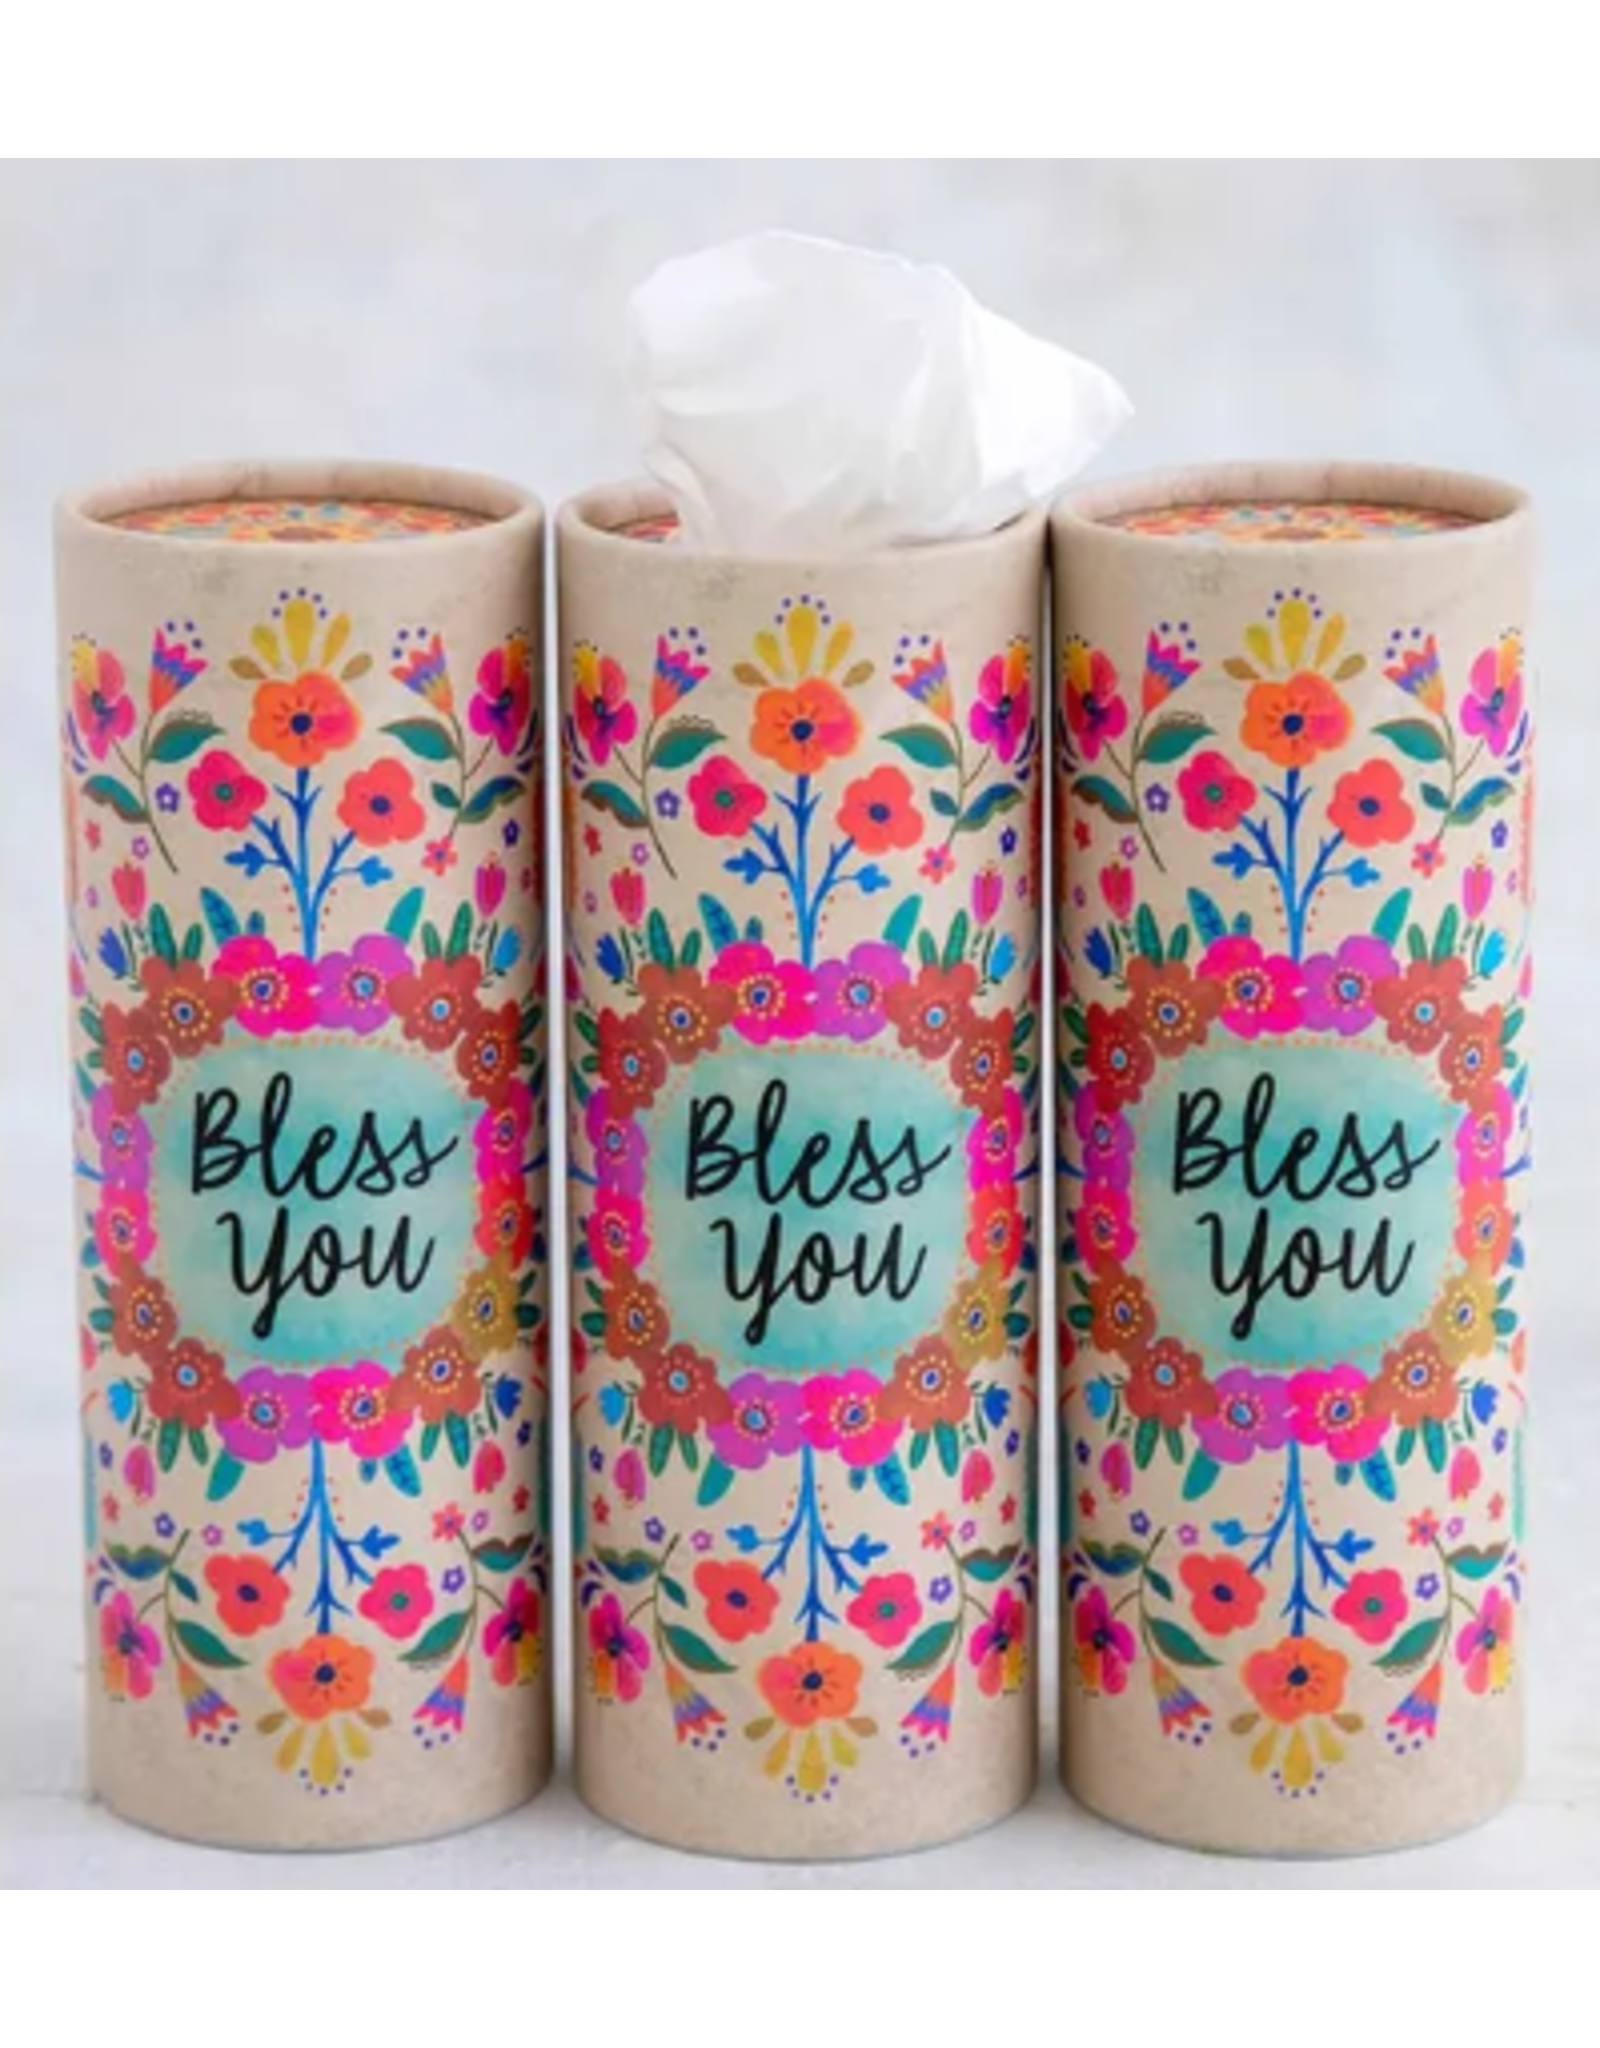 Natural LIfe Bless You Car Tissues, cream floral